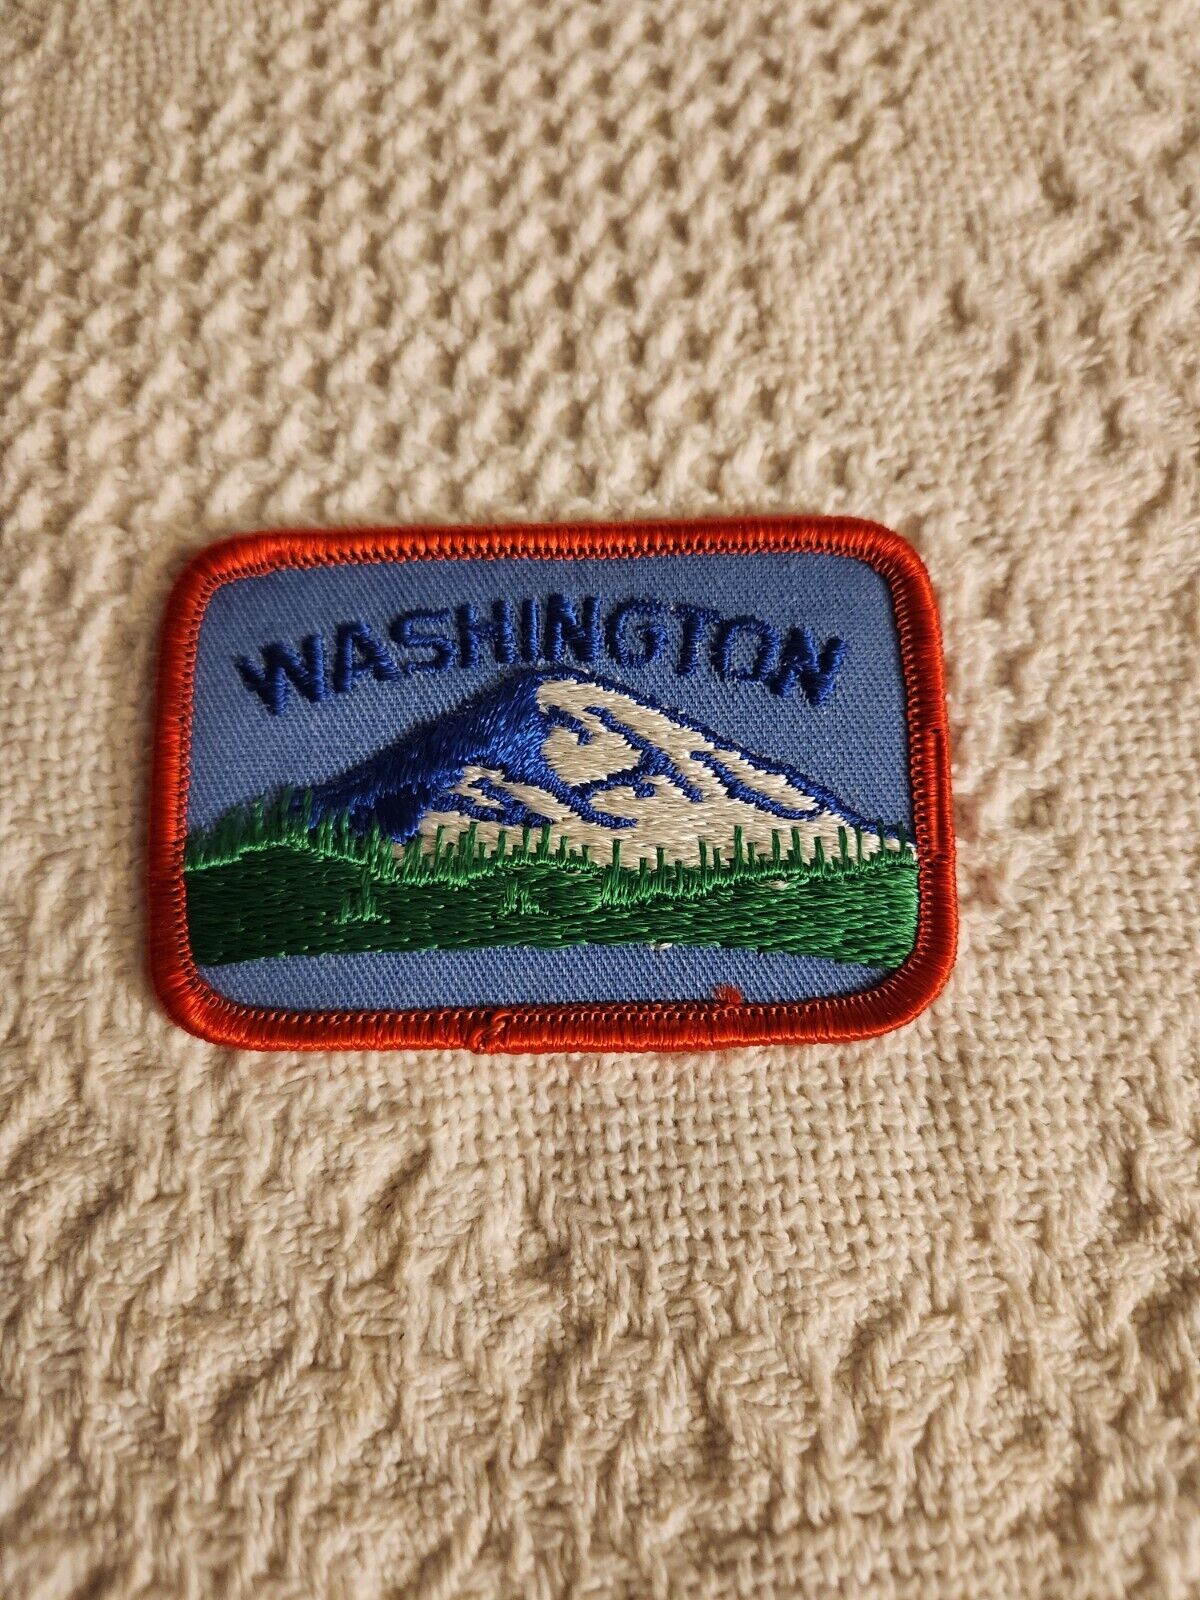 Washington State Vintage Embroidered Patch Pre-Owned Unused